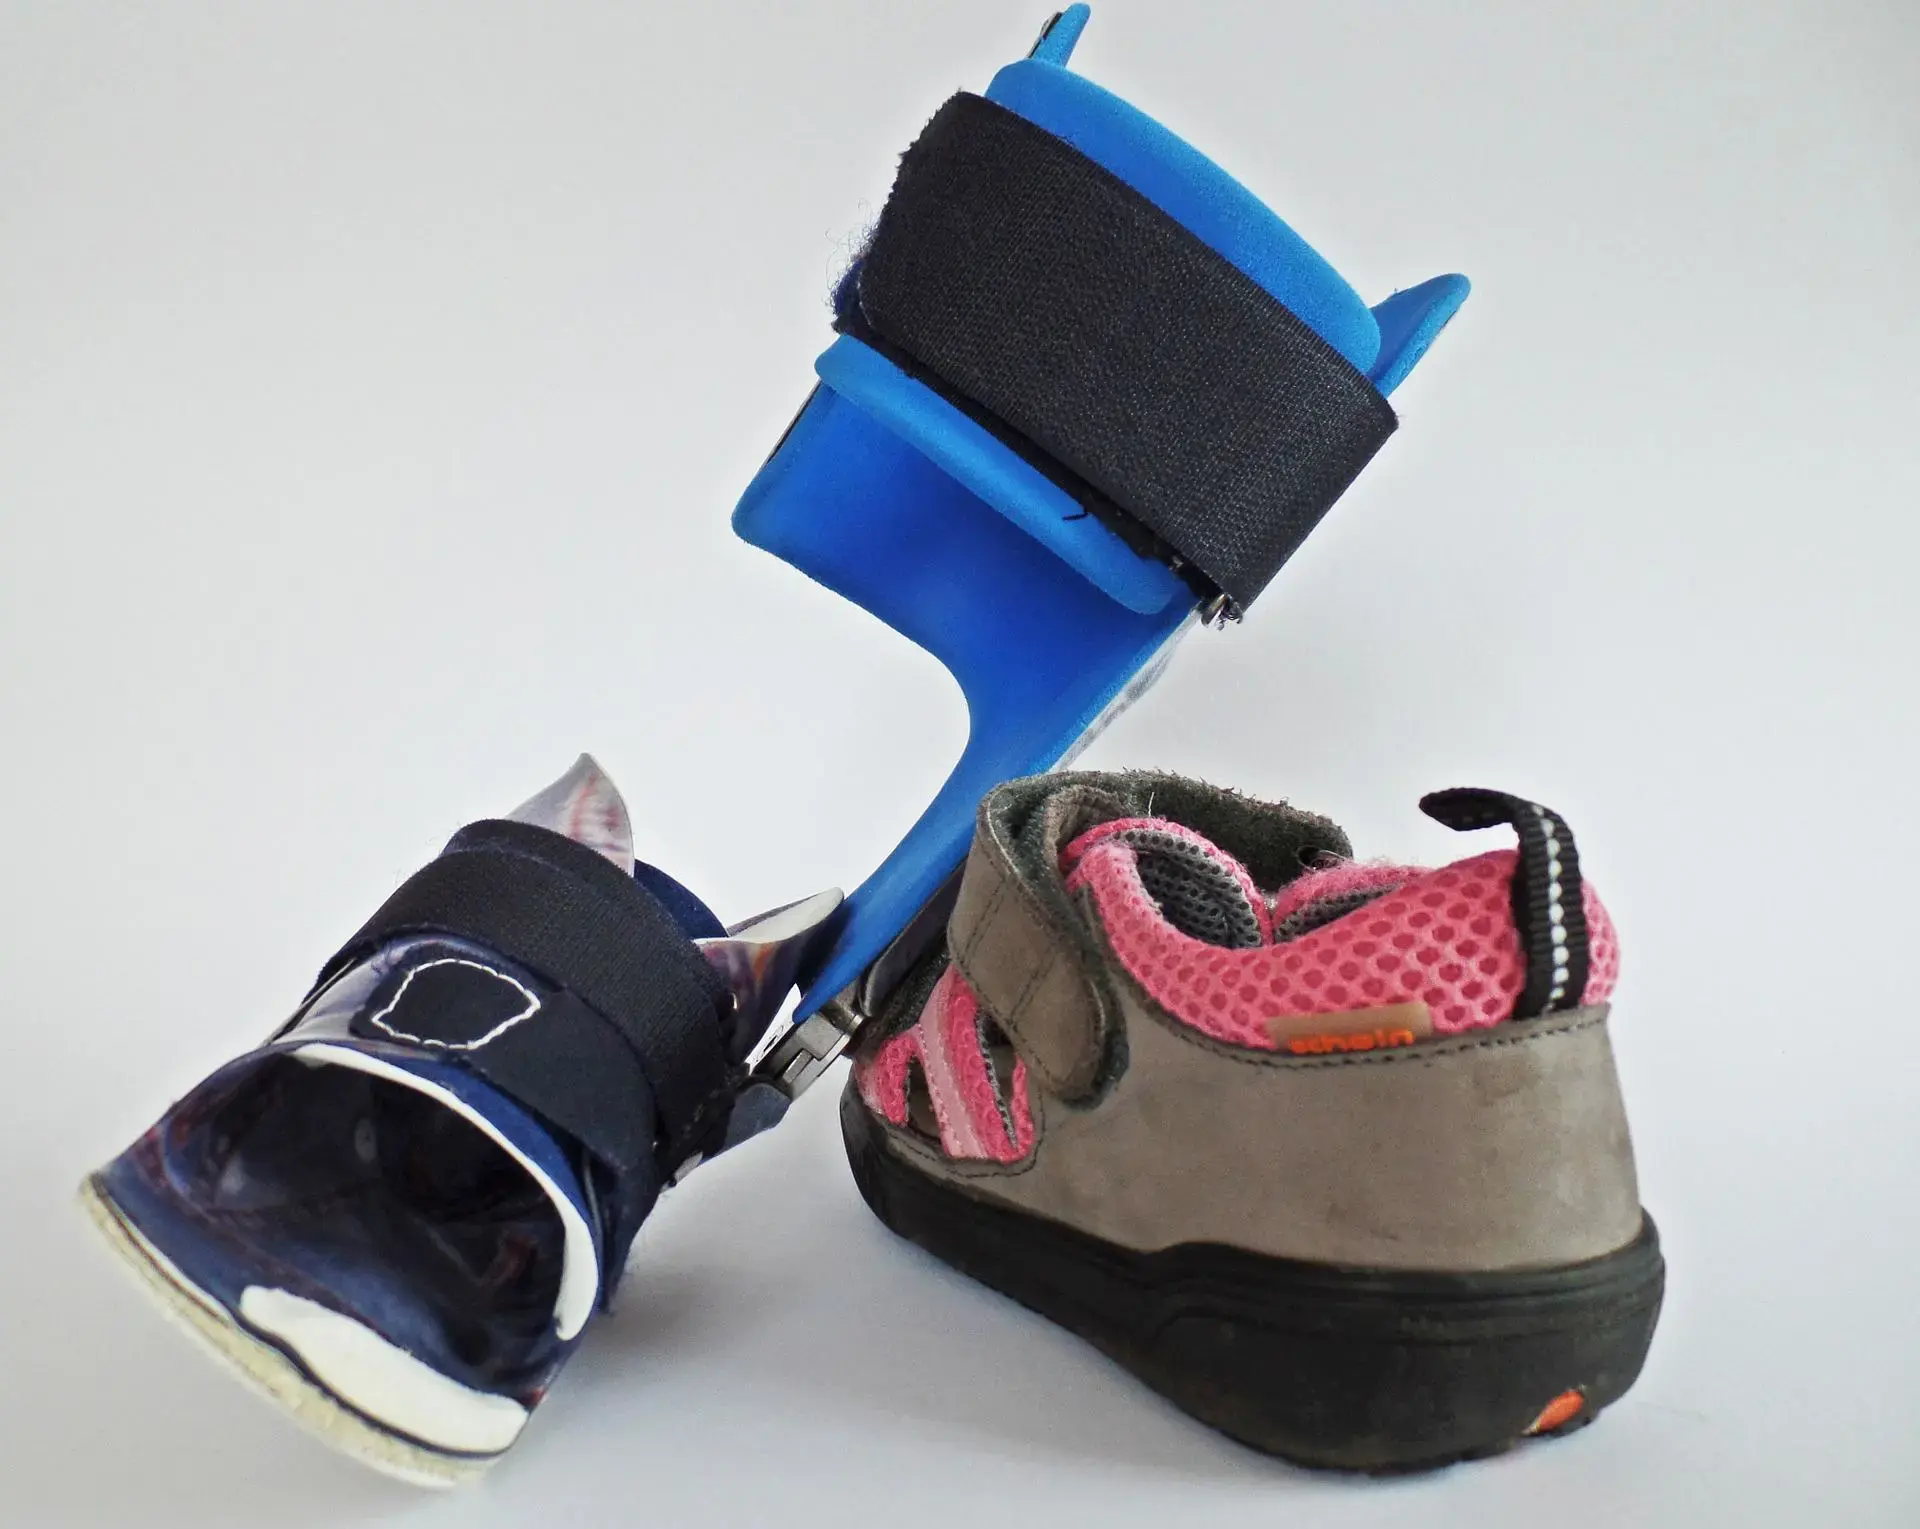 A leg brace that is medically necessary and covered by Medicare.